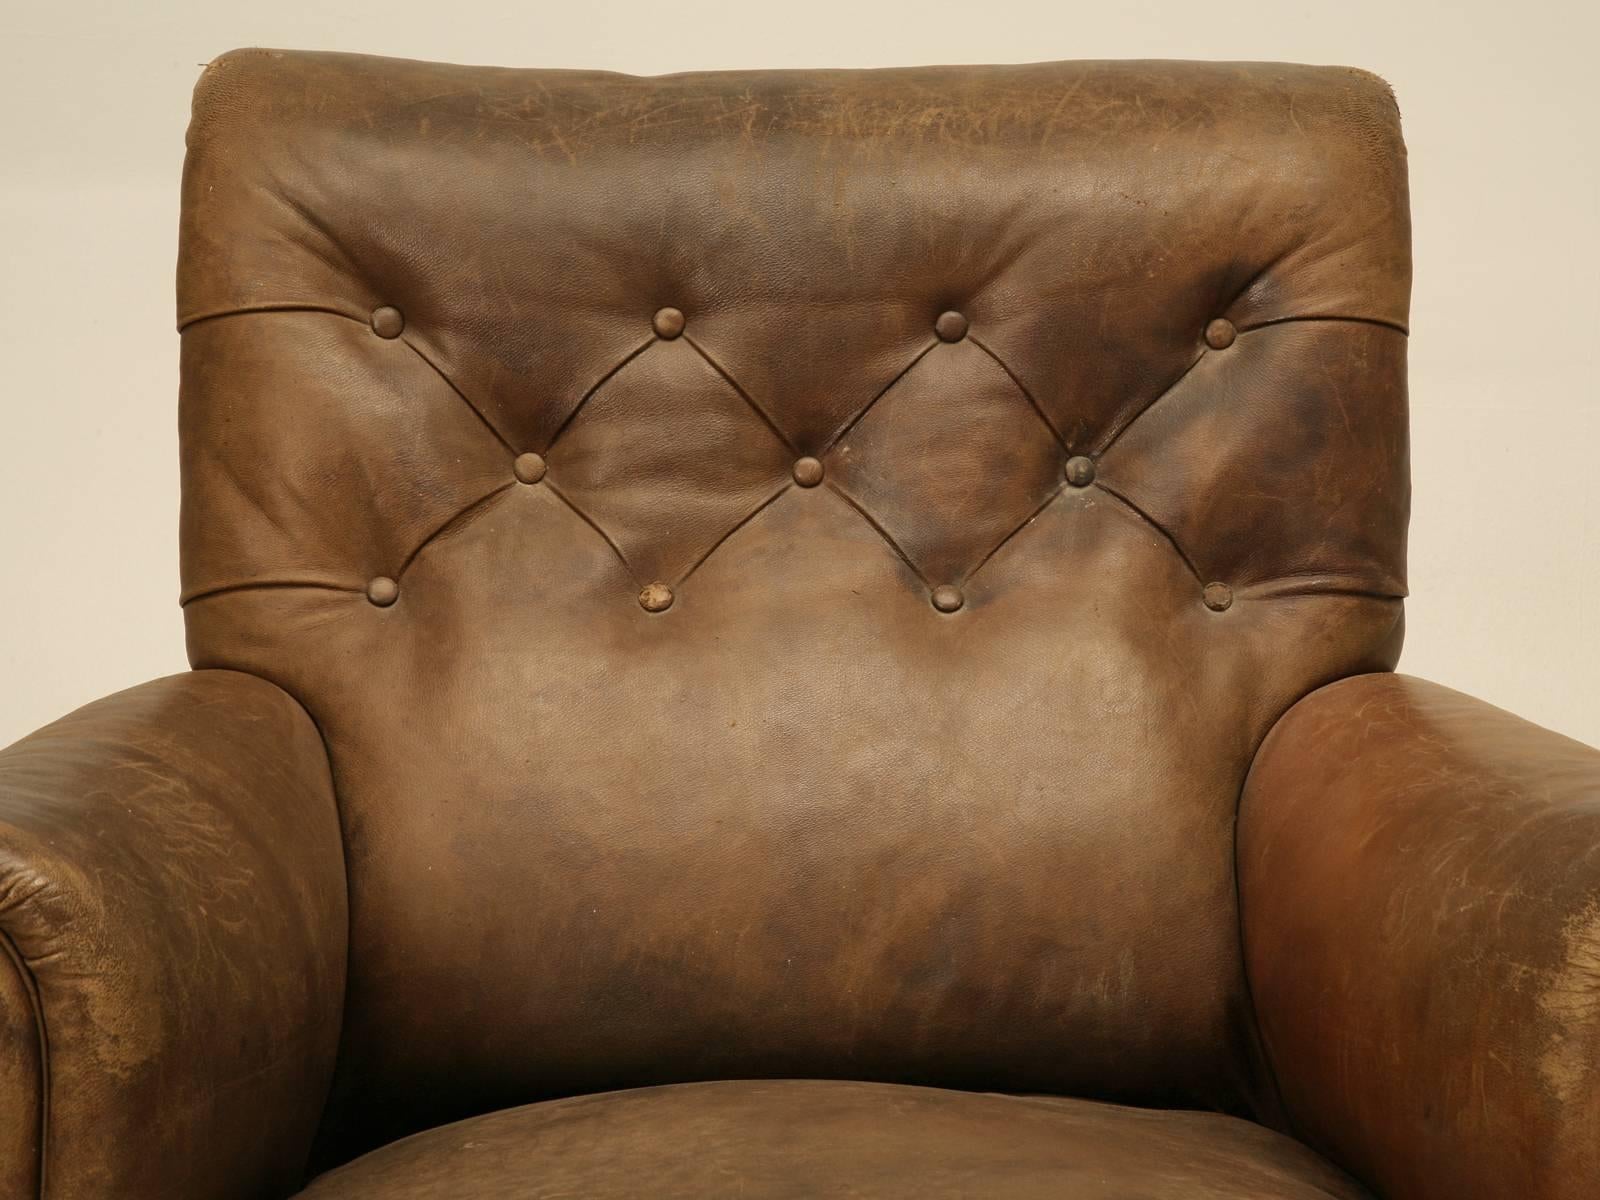 This is one of those impossible to find items, an old super comfortable, all original leather chair. Soon as you sit down, it is already telling you that this is a proper napping chair and when you lean back, the top of the chair embraces your neck